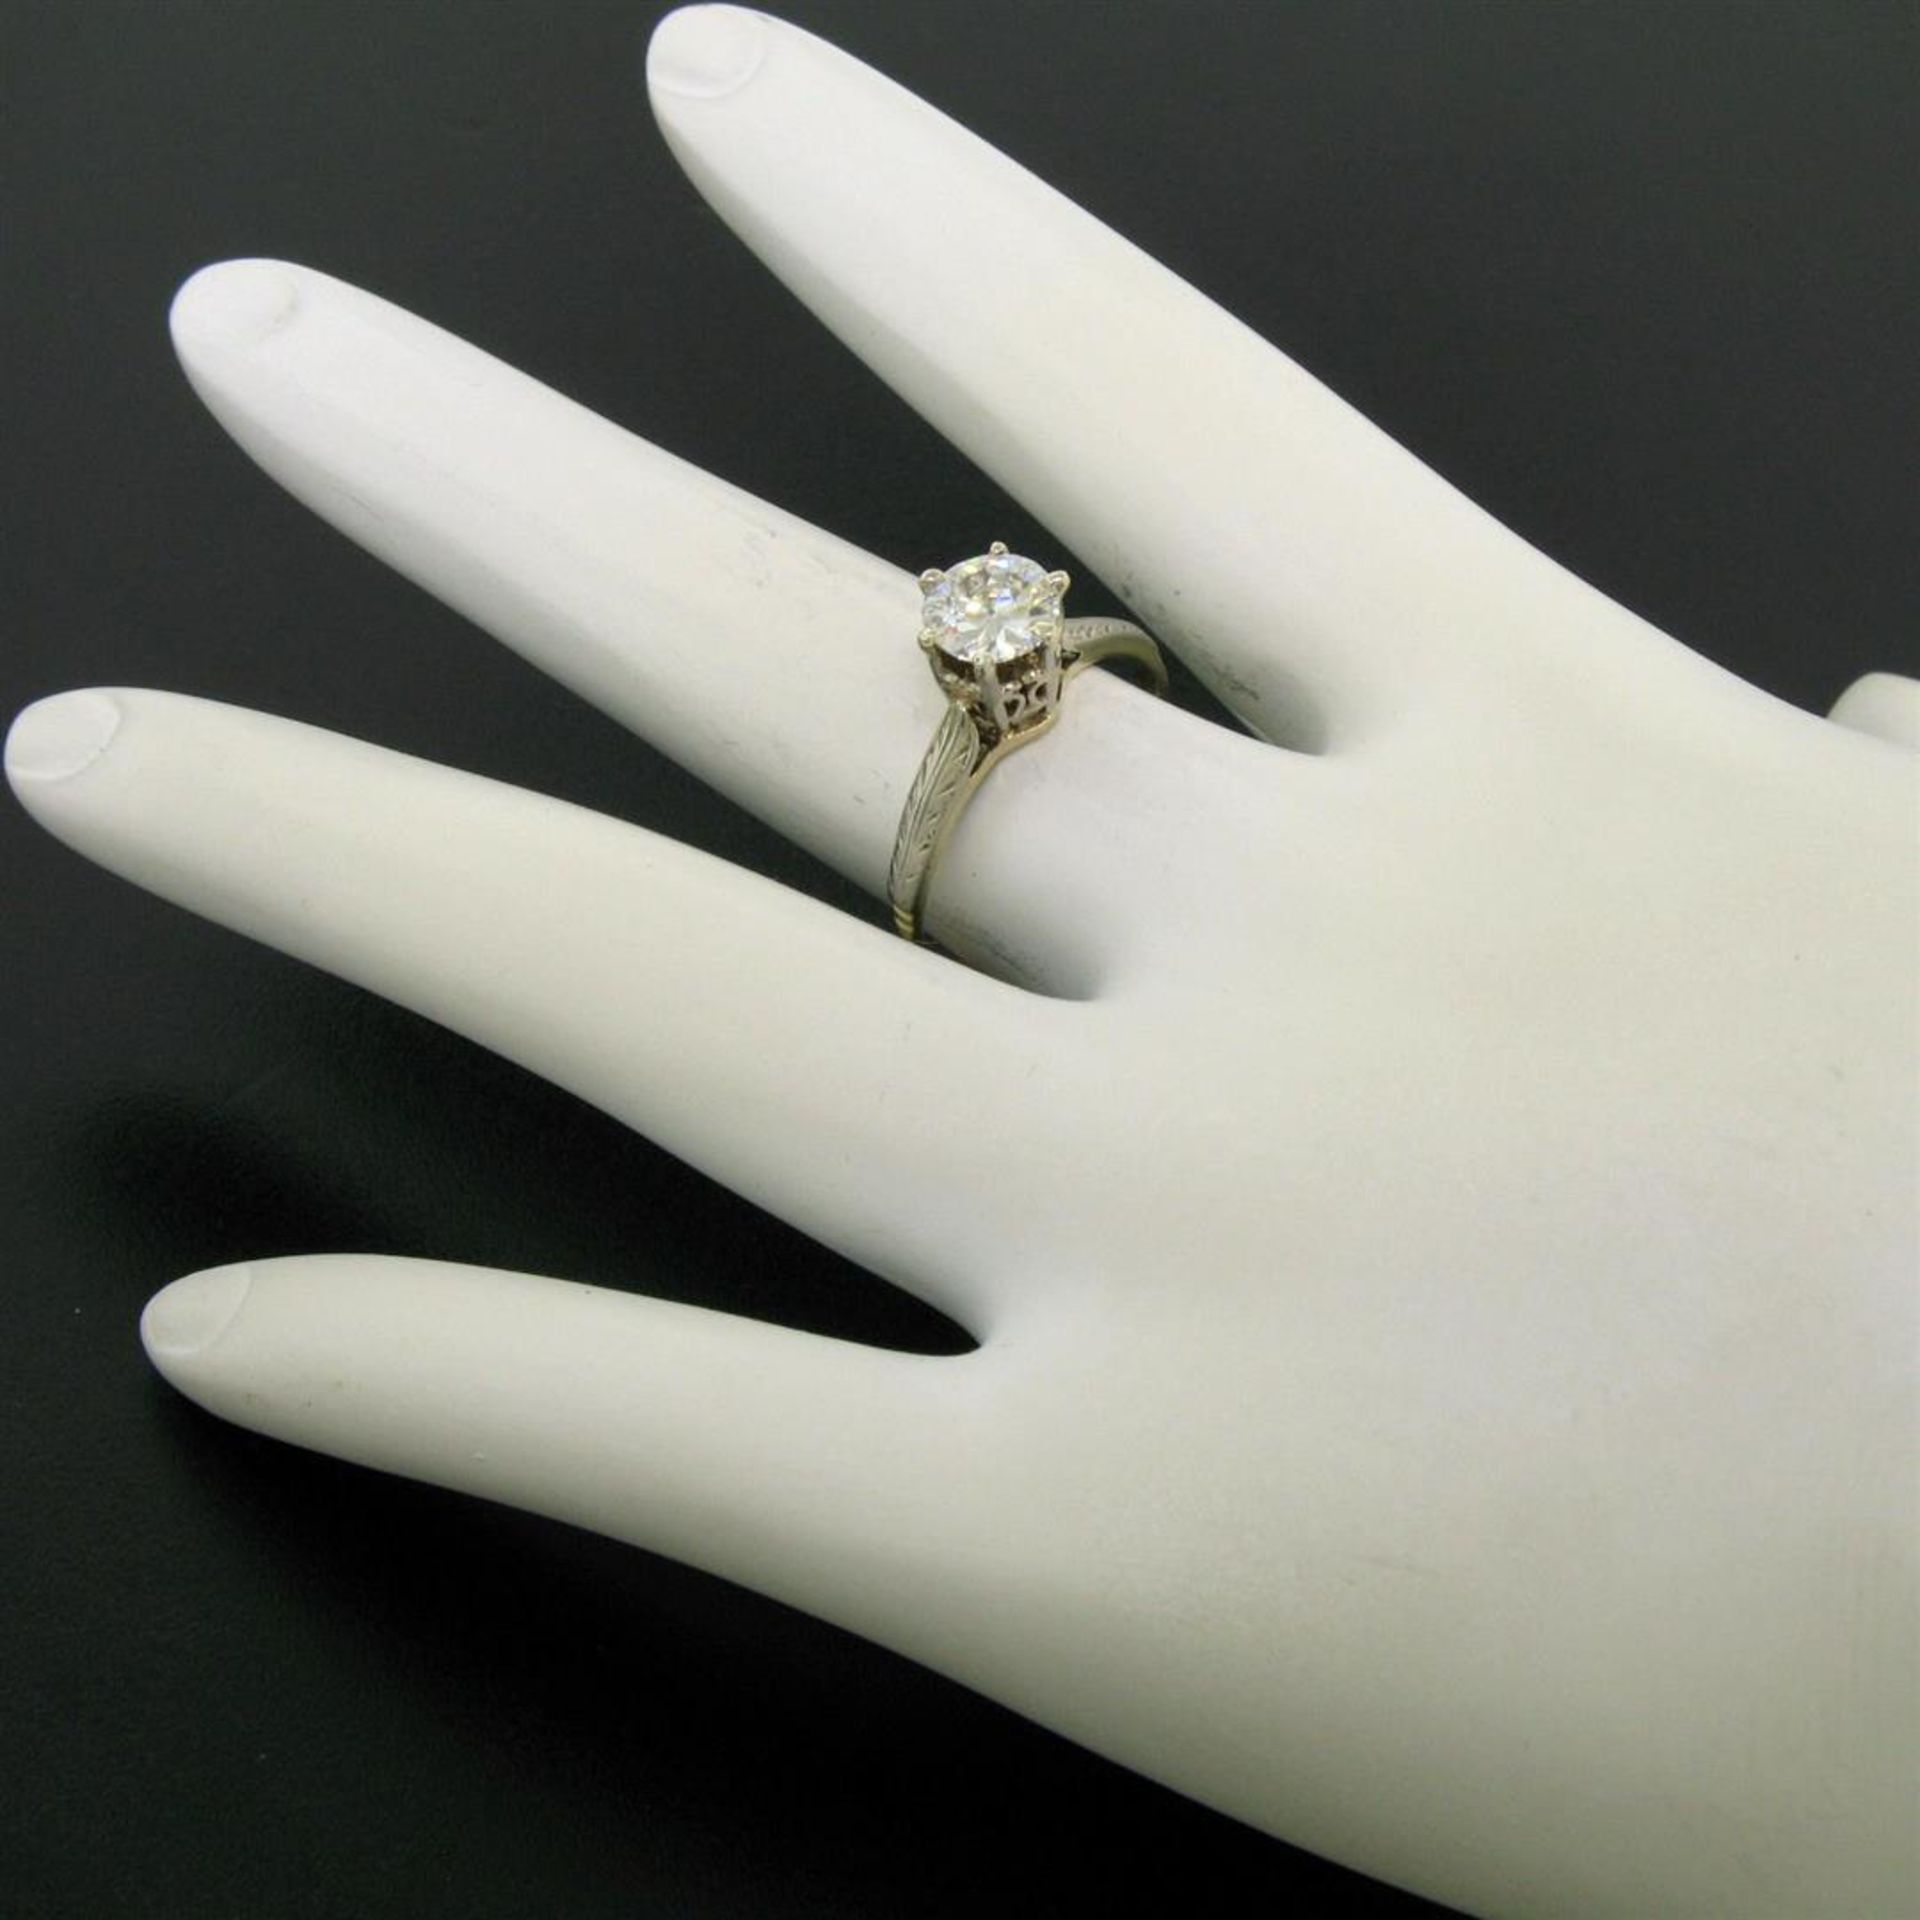 Etched 14k TT Gold .80 ctw European Cut Diamond Solitaire Engagement Ring - Image 3 of 7